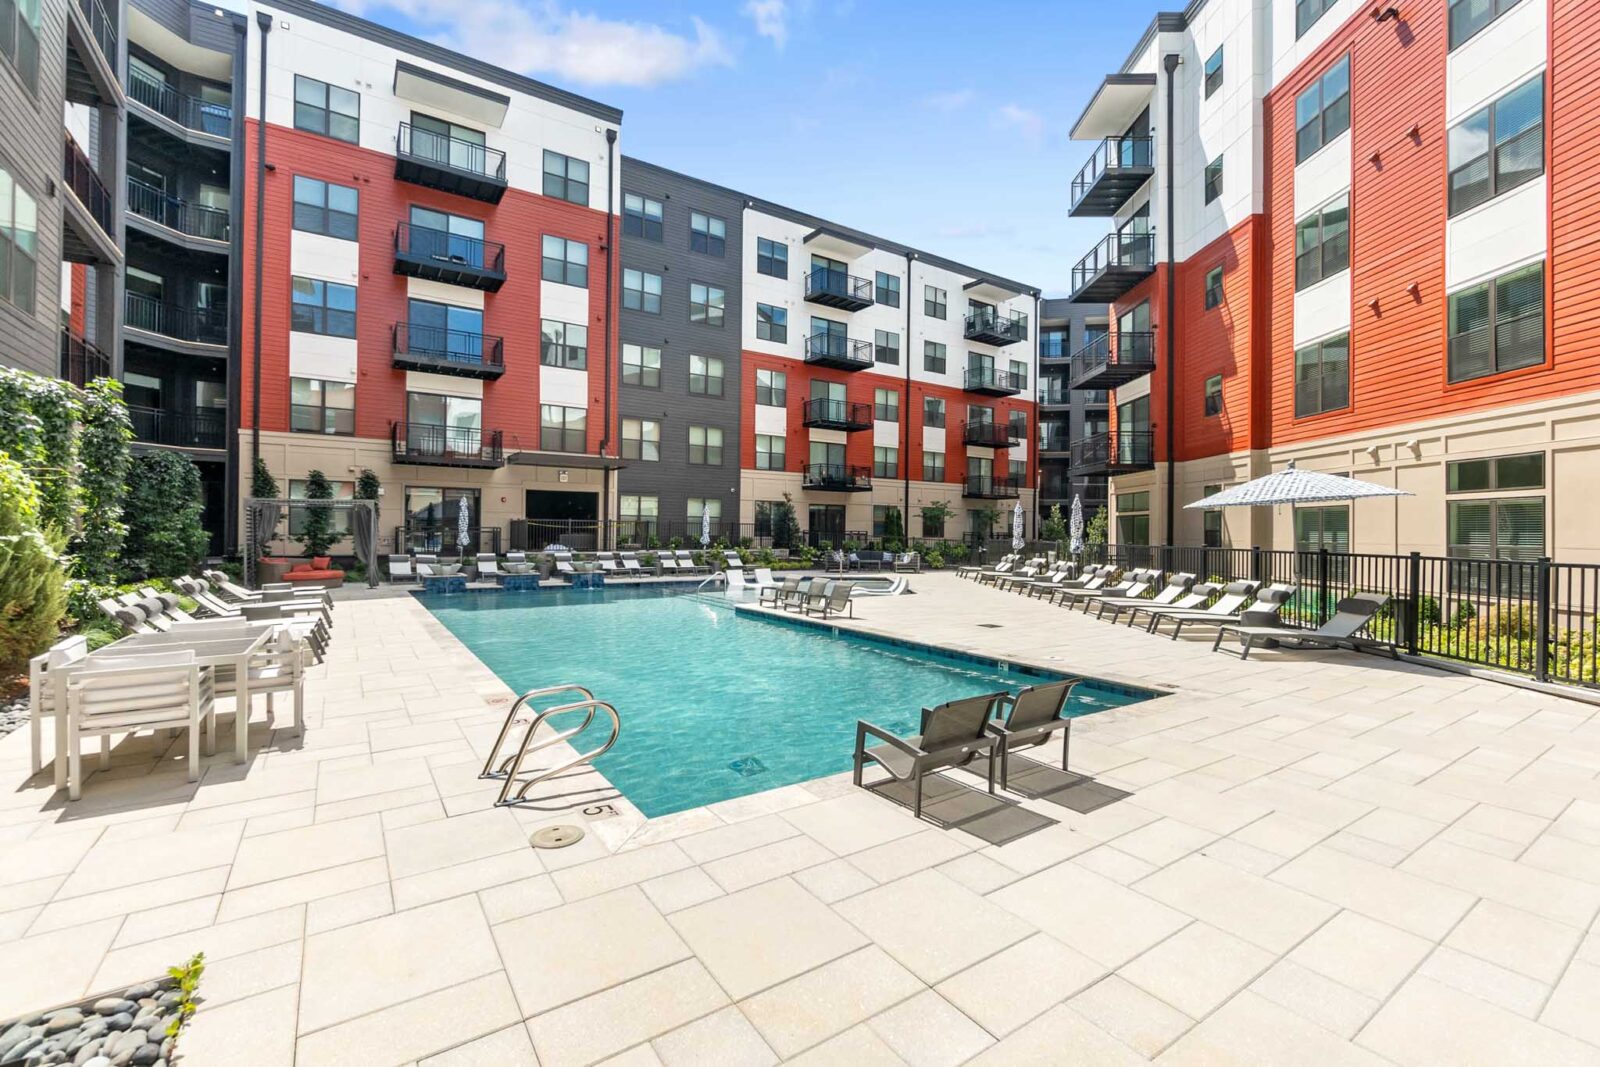 Poolside view of Tapestry West Apartments